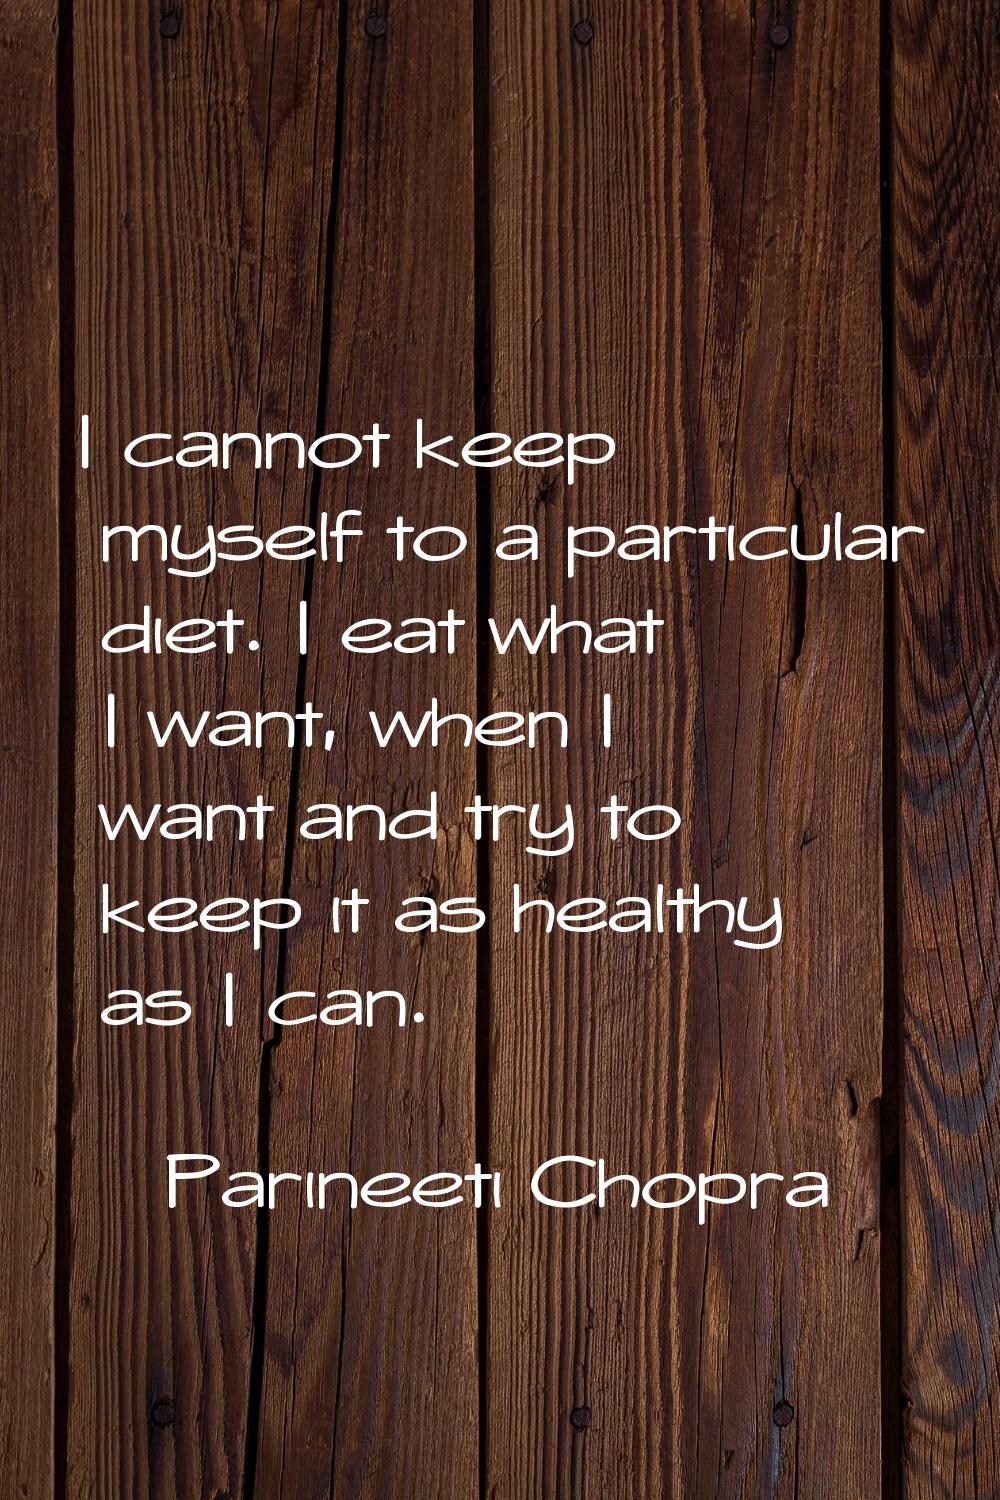 I cannot keep myself to a particular diet. I eat what I want, when I want and try to keep it as hea